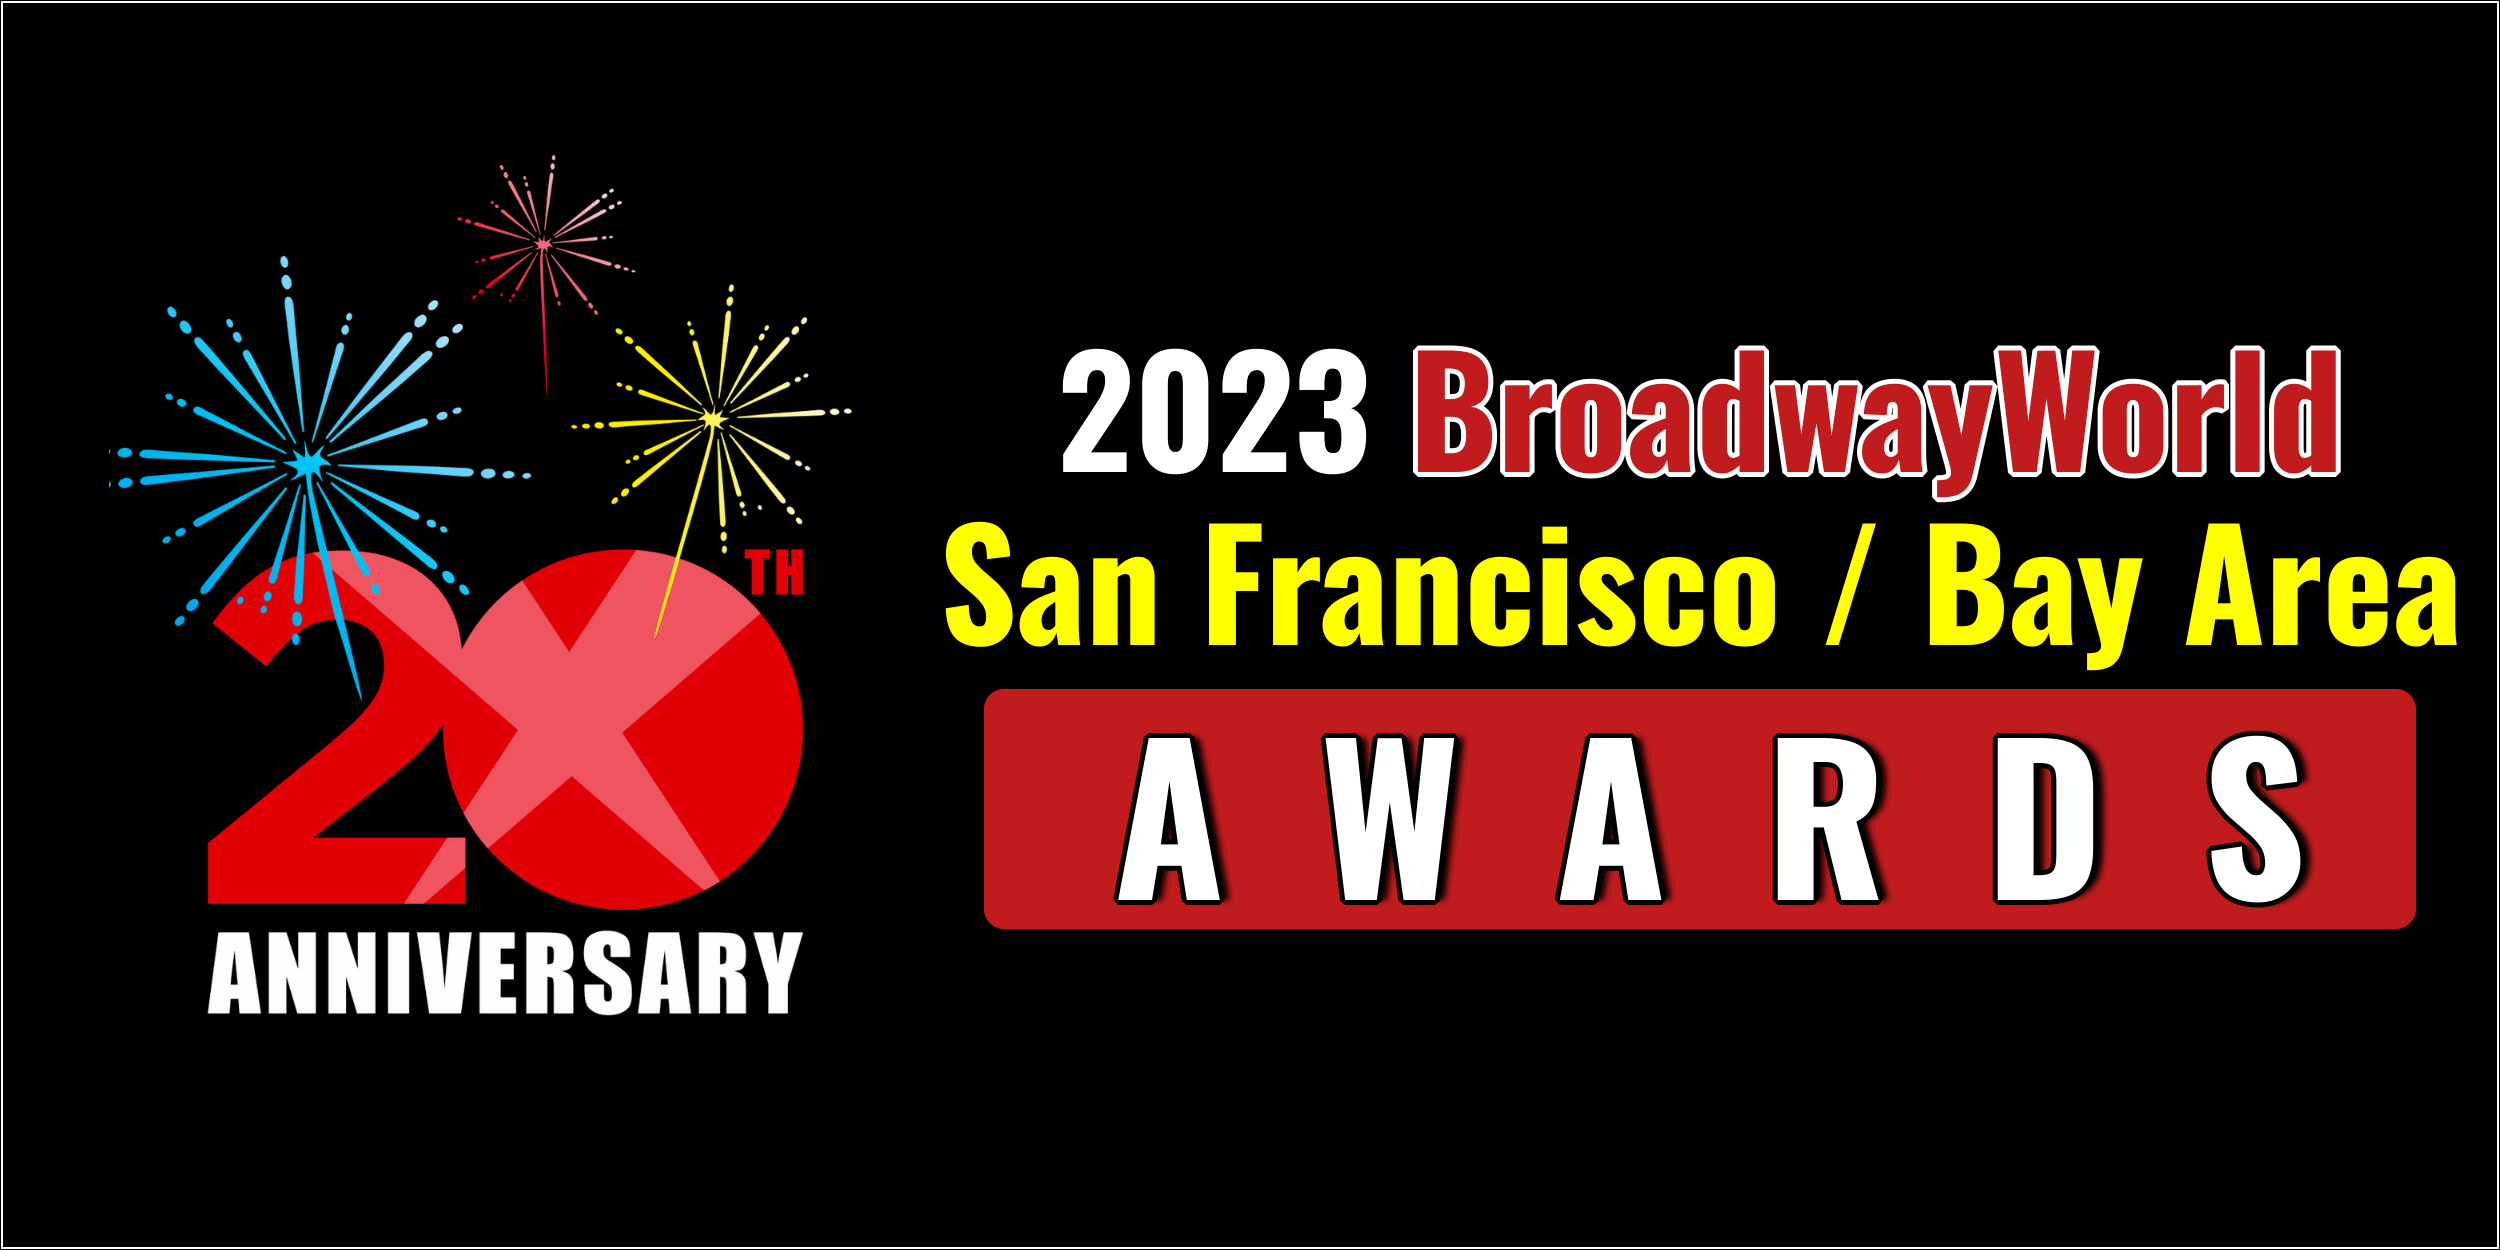 Latest Standings Announced For The 2023 BroadwayWorld San Francisco / Bay Area Awards; The Photo